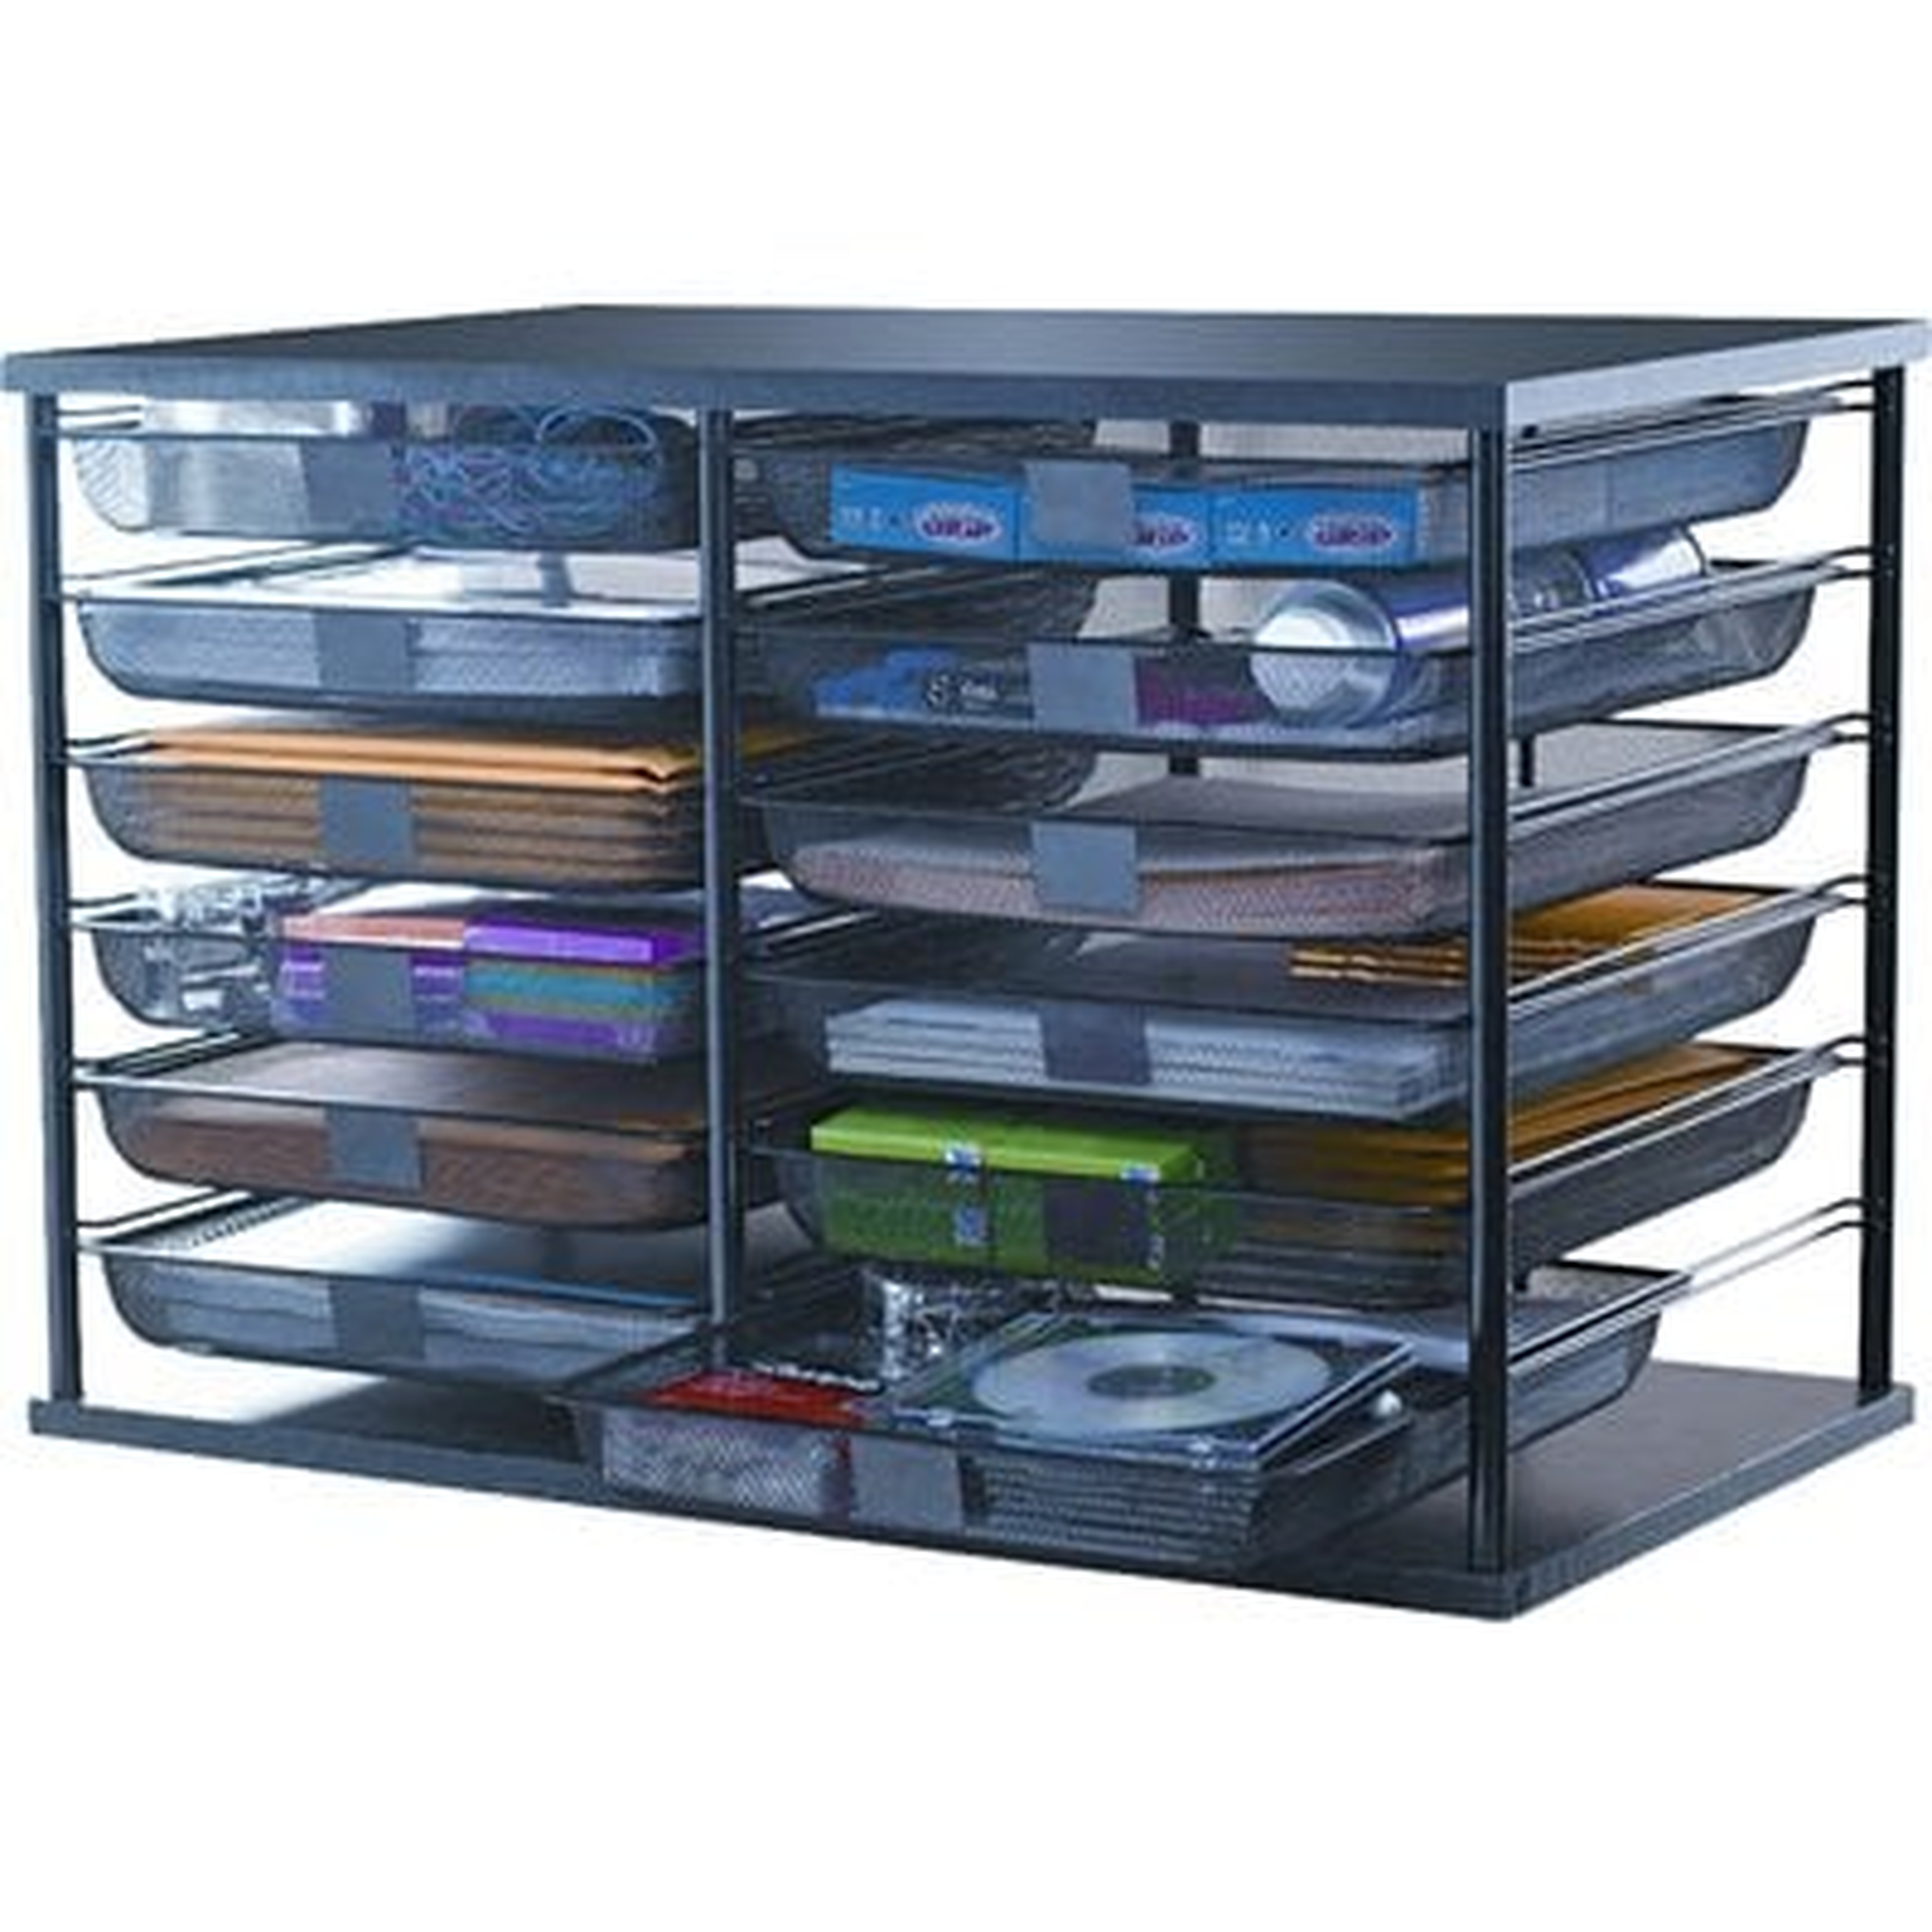 12-Compartment Organizer with Mesh Drawers - Wayfair